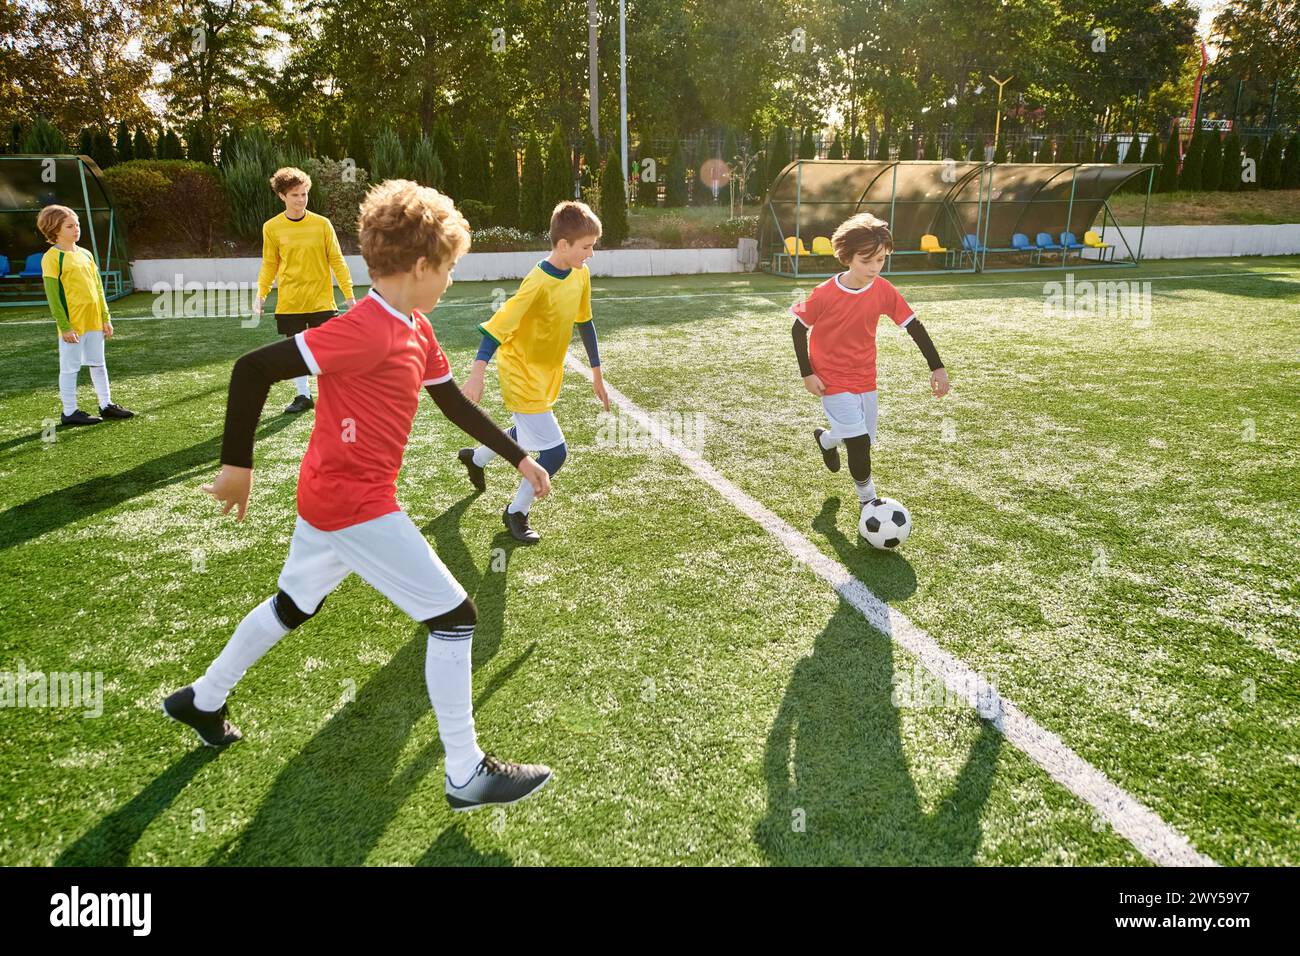 A group of young boys enthusiastically playing a game of soccer on a green field. They are running, kicking the ball, and cheering each other on, disp Stock Photo